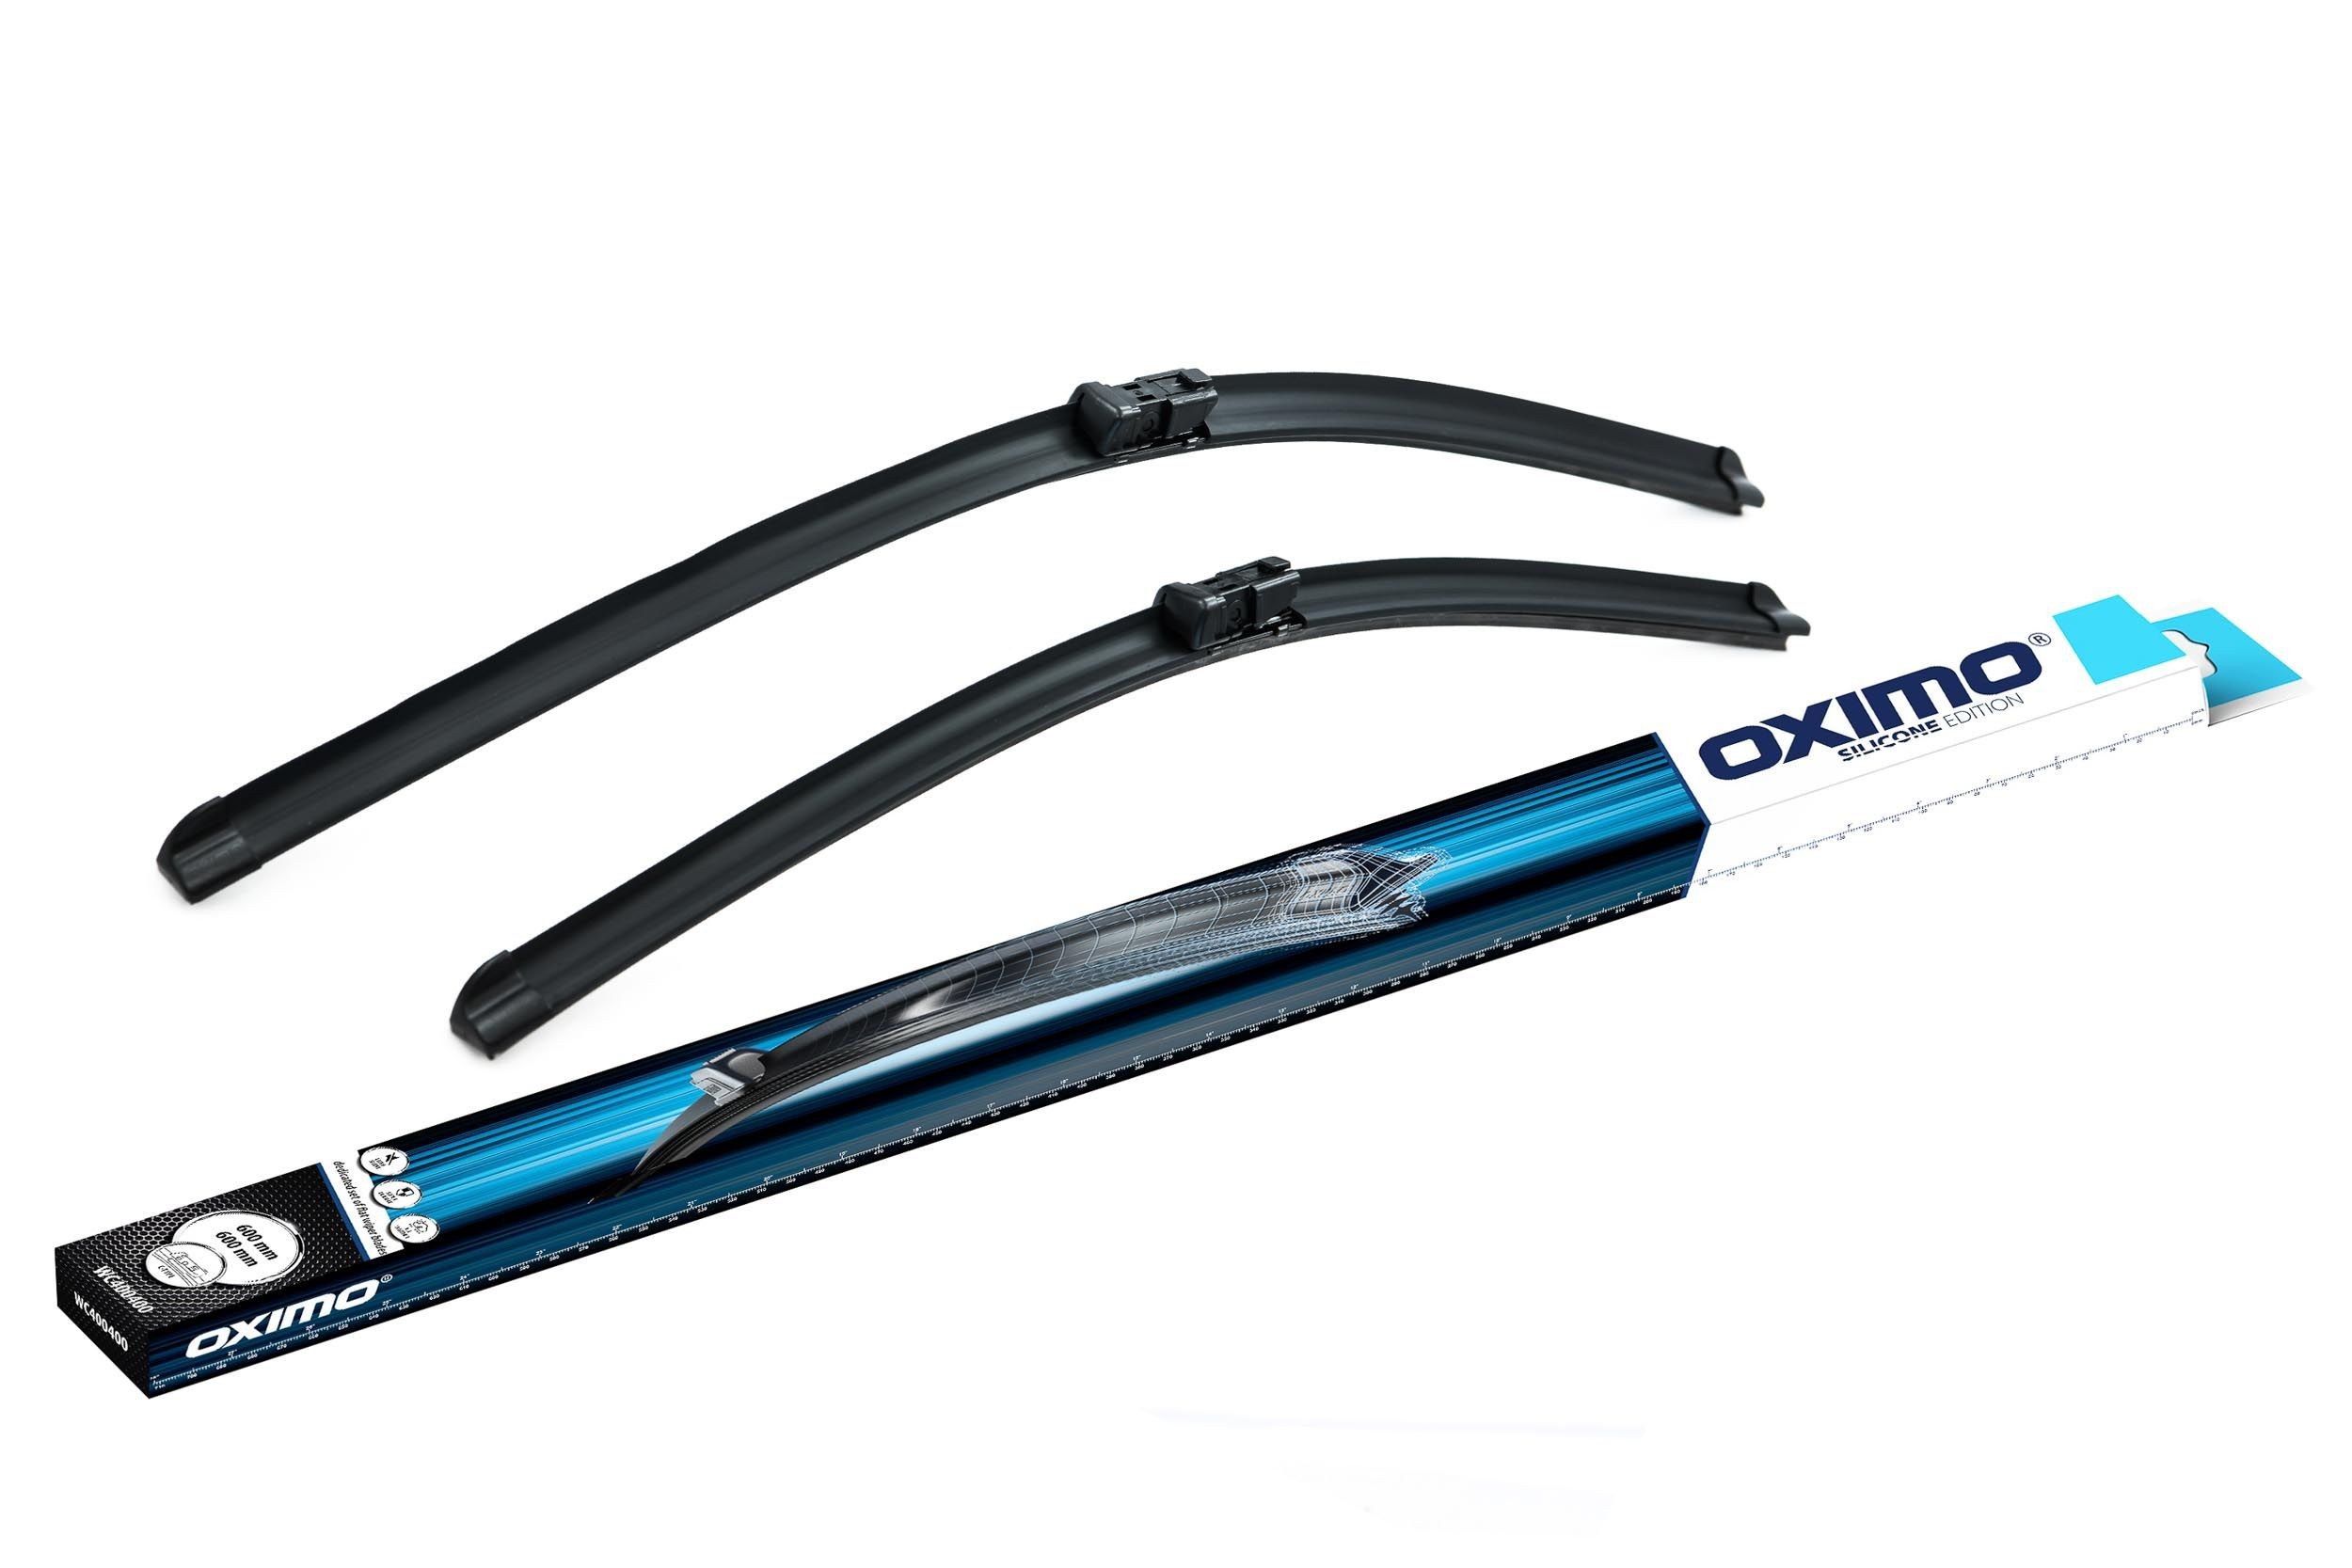 Mercedes E-Class Window wipers 14313775 OXIMO WC400400 online buy